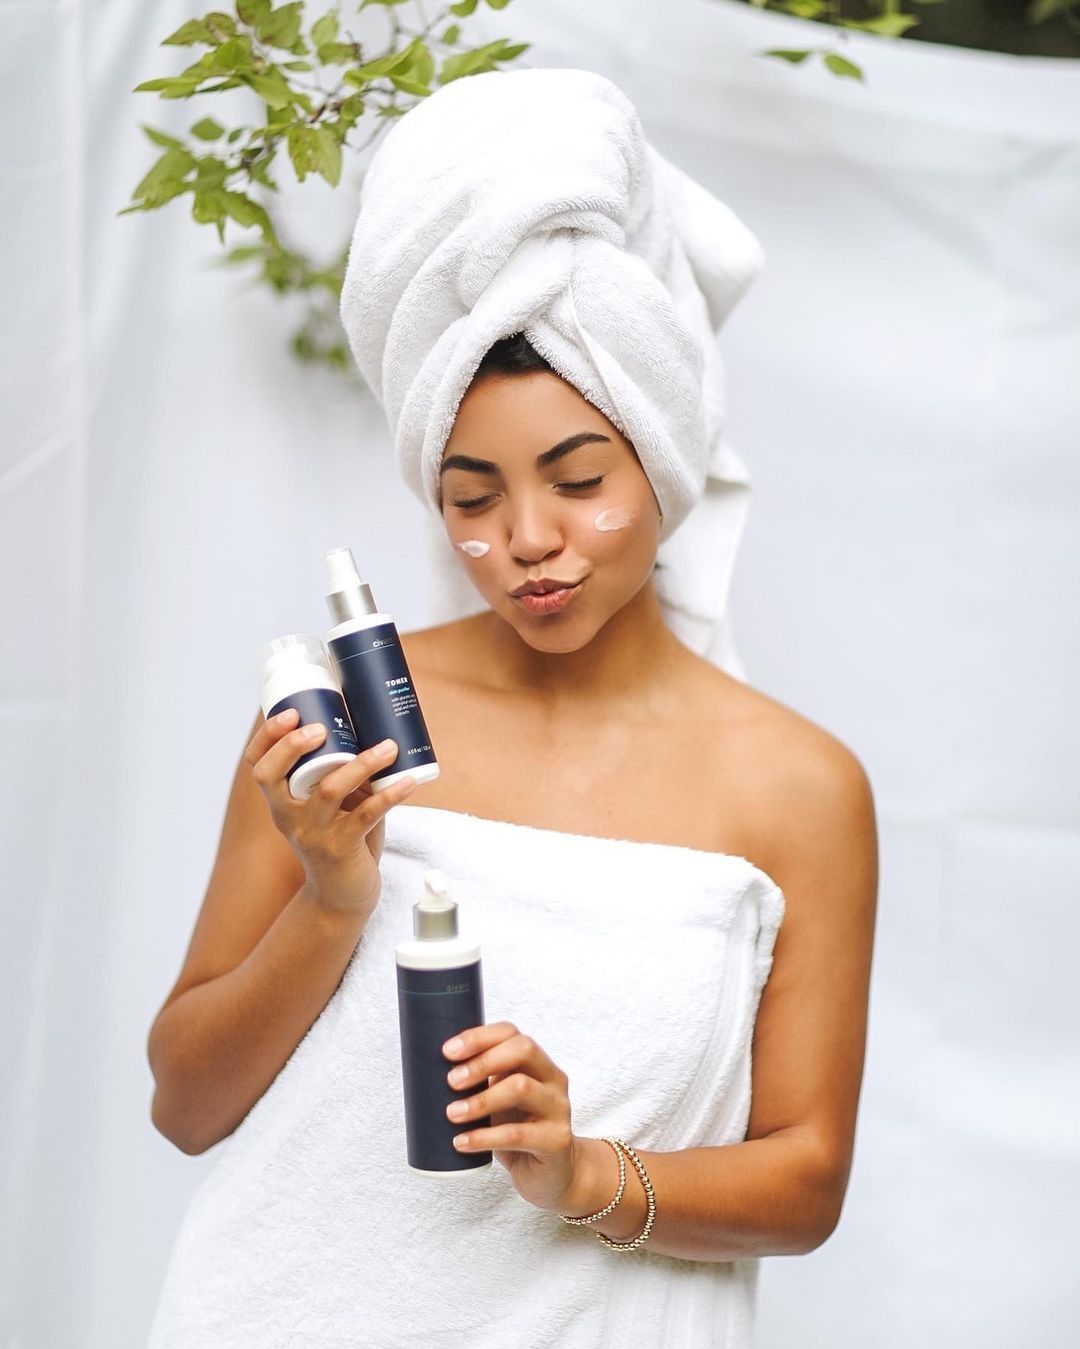 Woman in spa-like bathroom with her Civant product morning routine